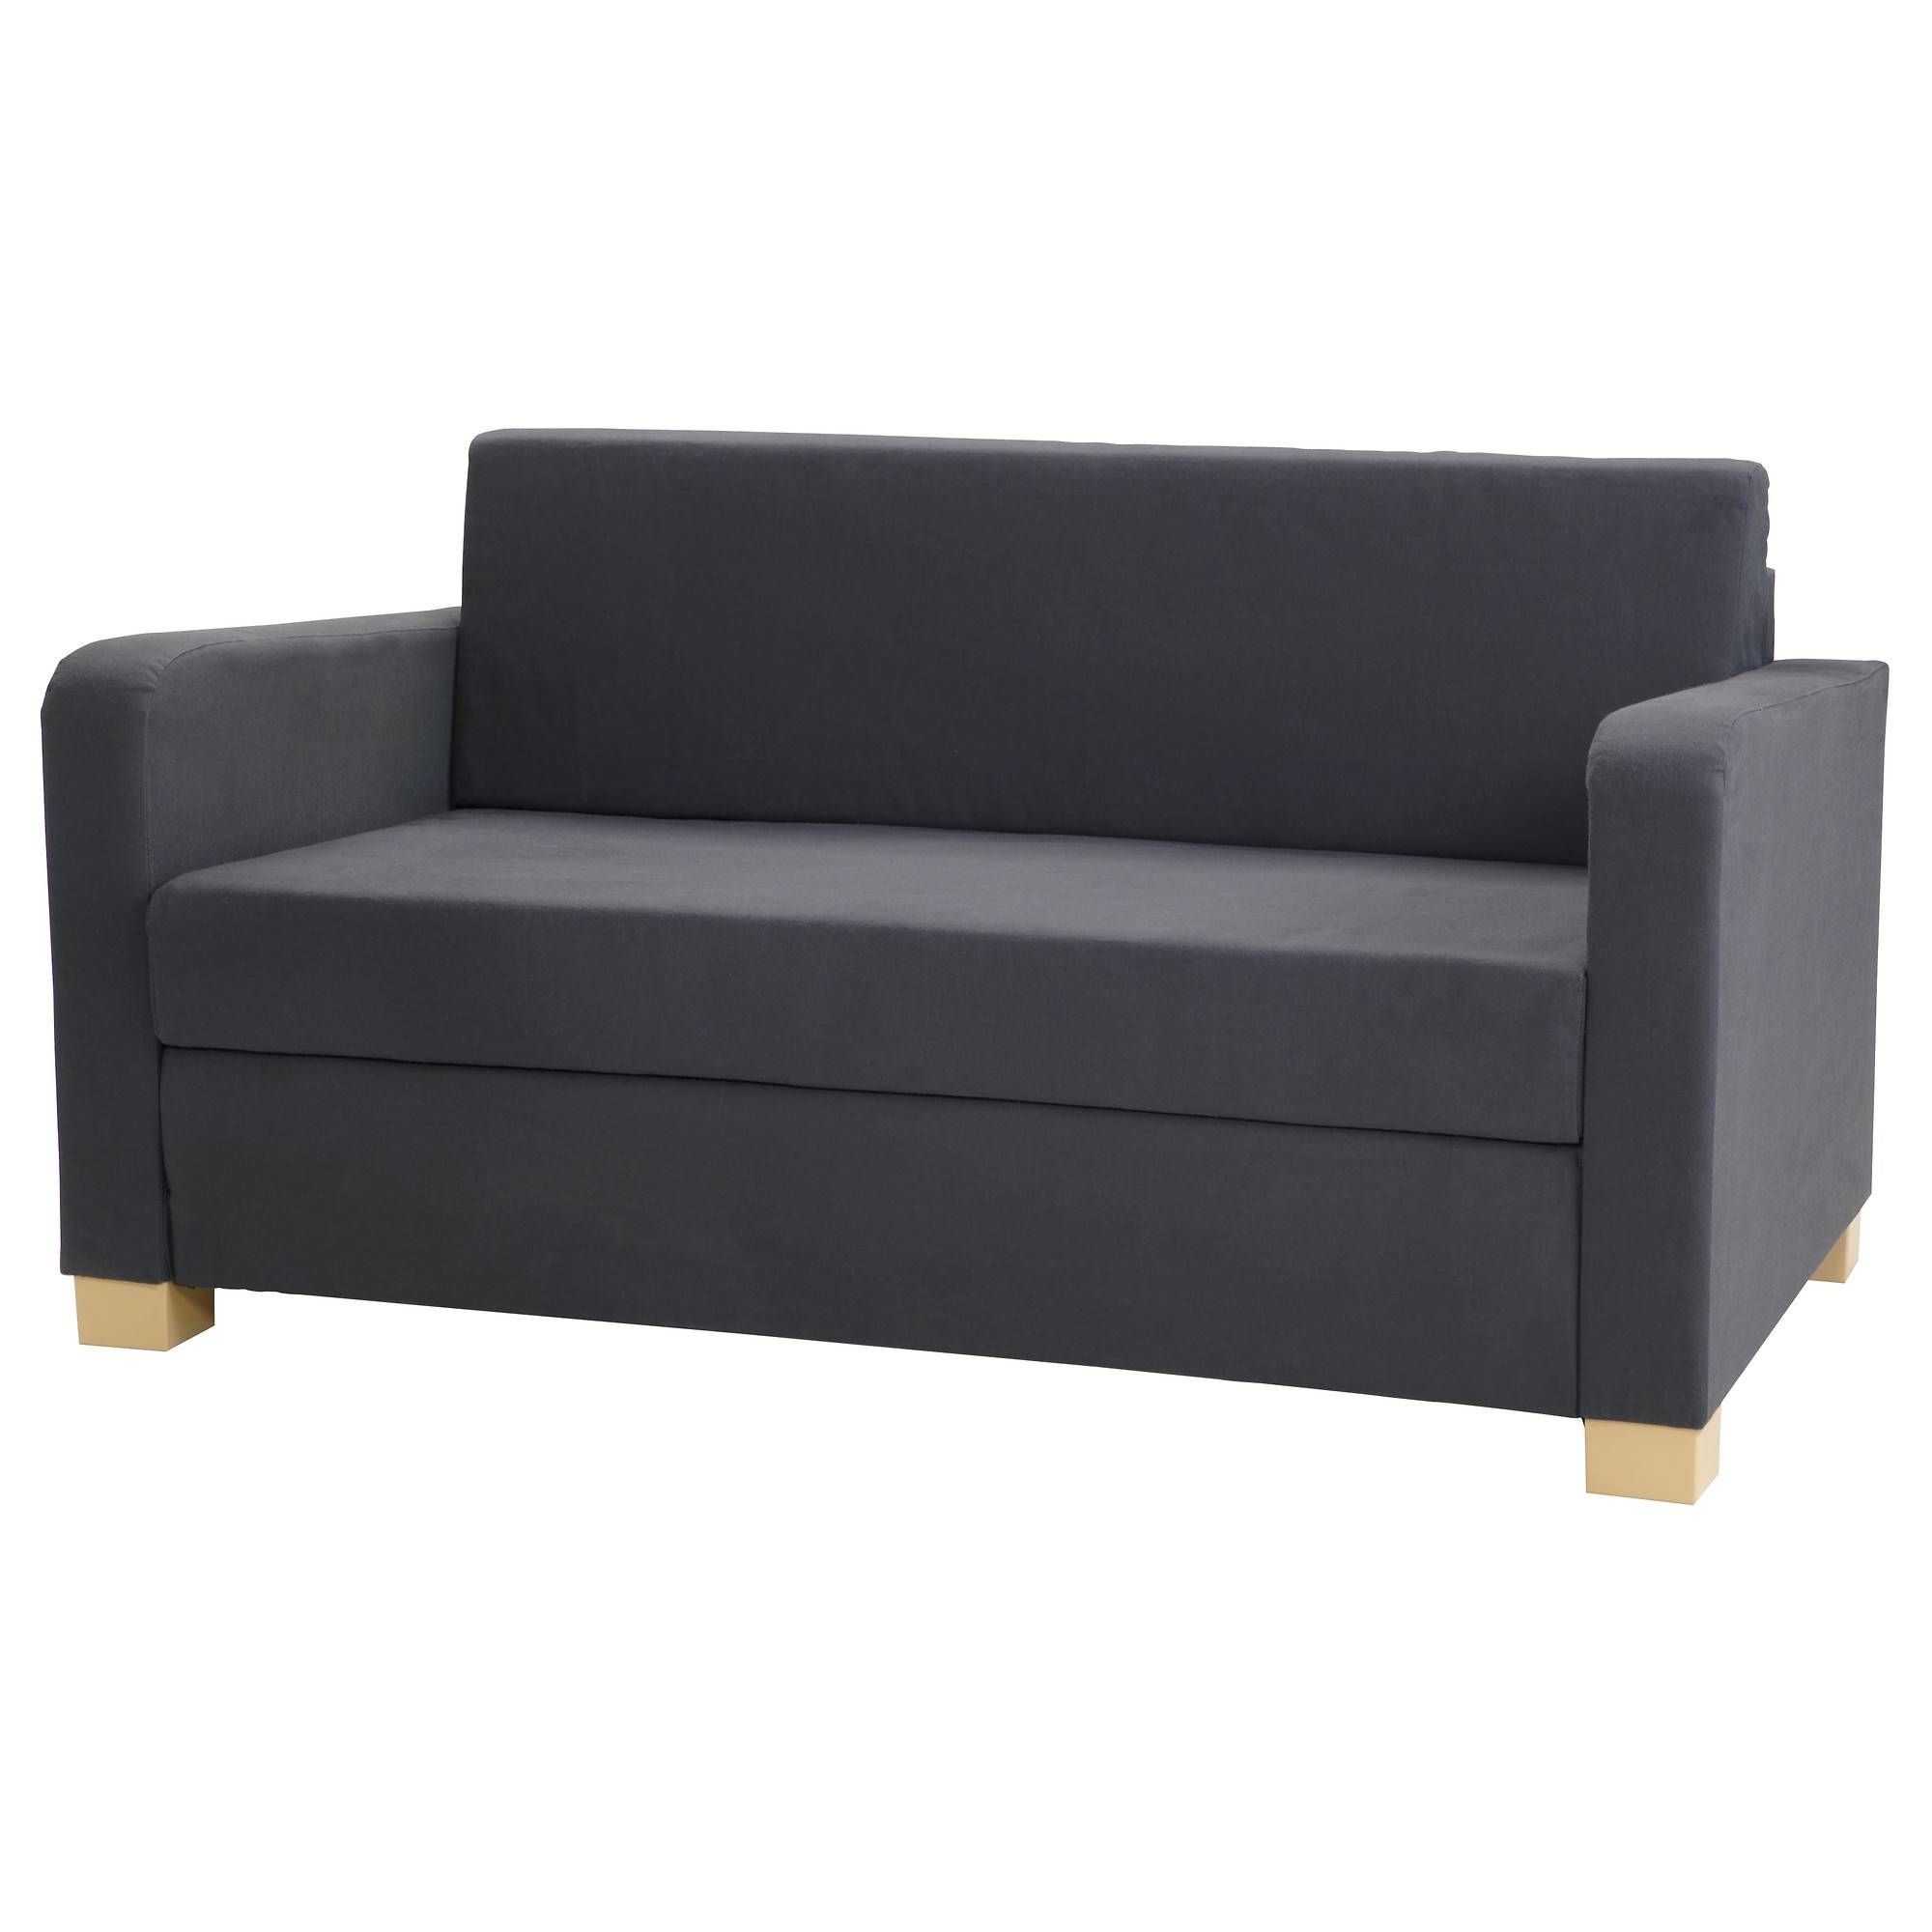 Solsta Sofa Bed – Ikea Within Sofa Beds (View 11 of 15)